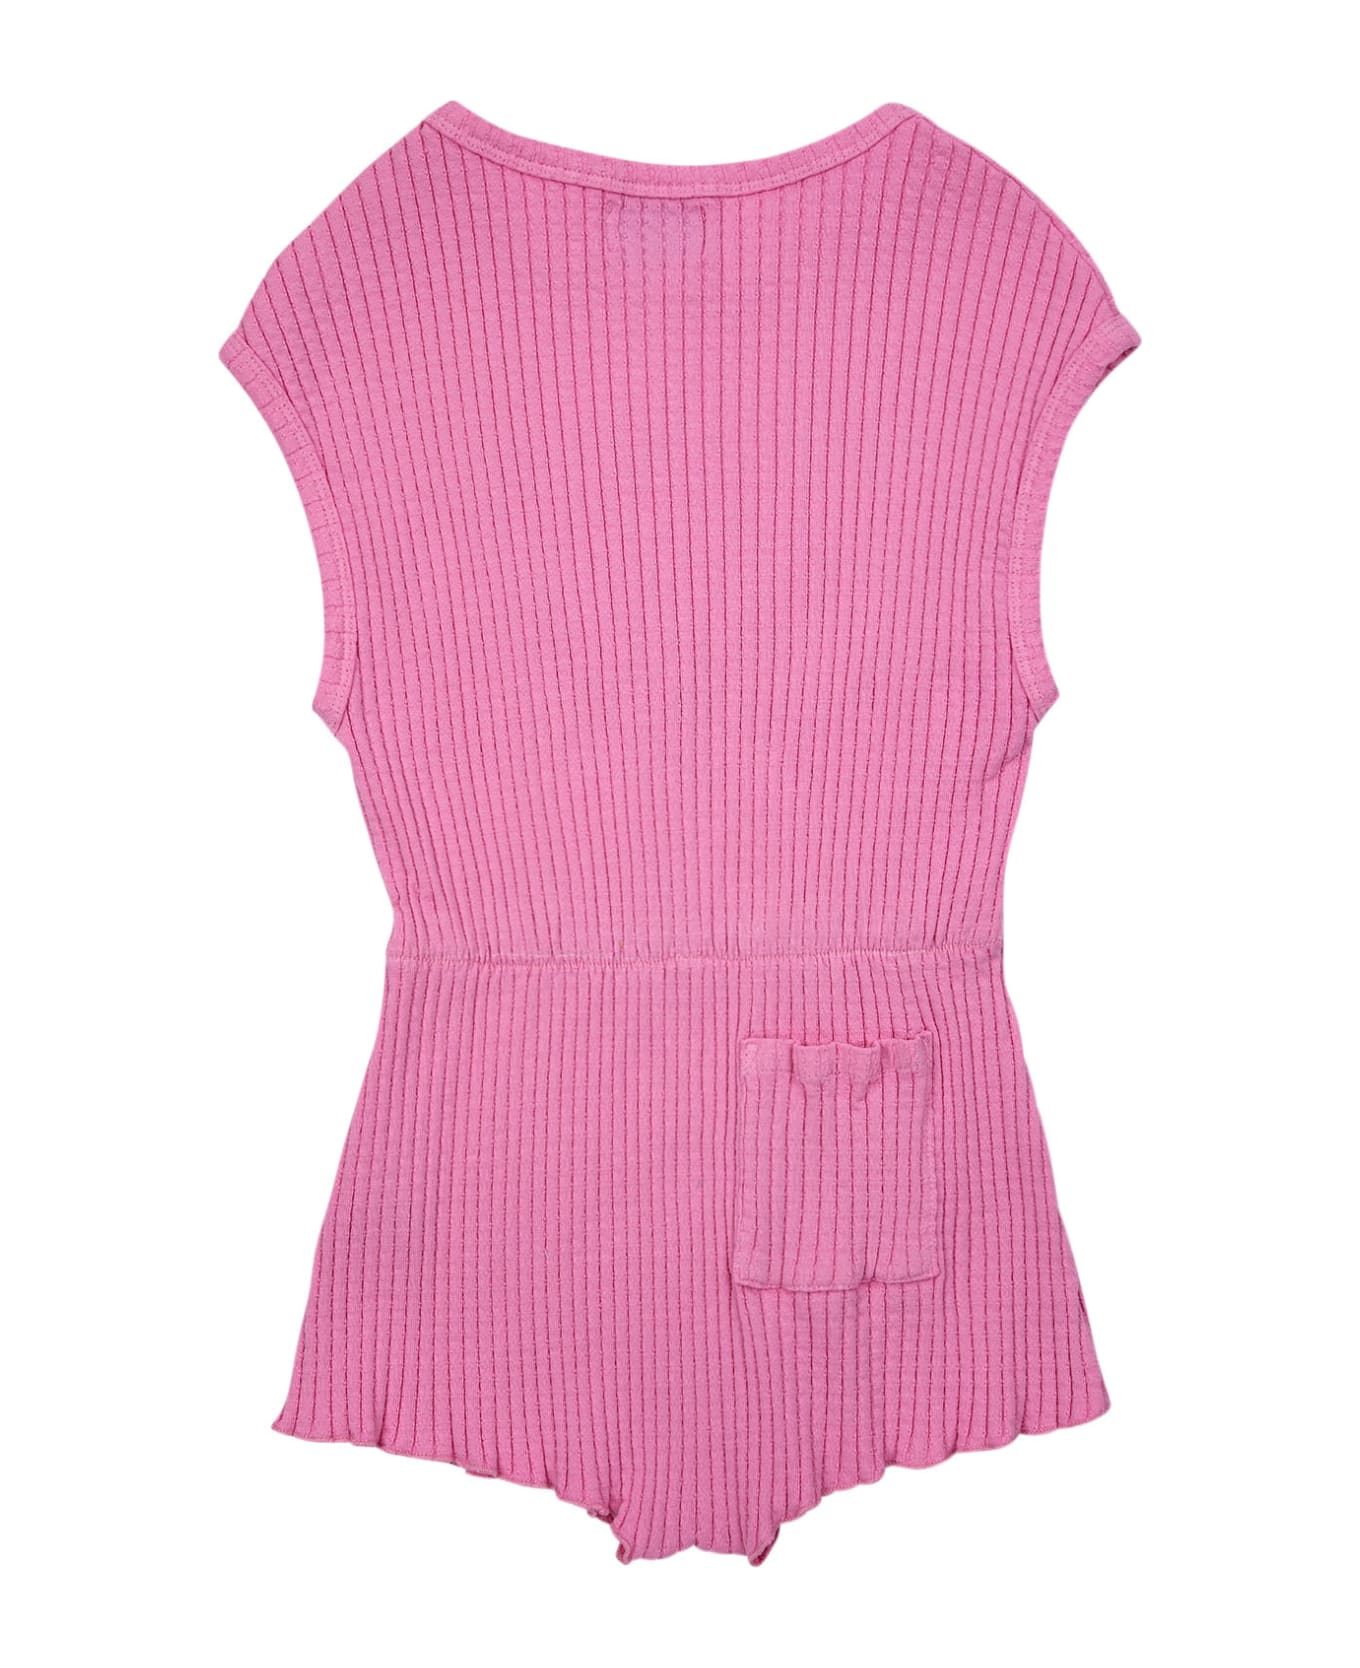 Bobo Choses Pink Jumpsuit For Girl With Logo - Pink ジャンプスーツ